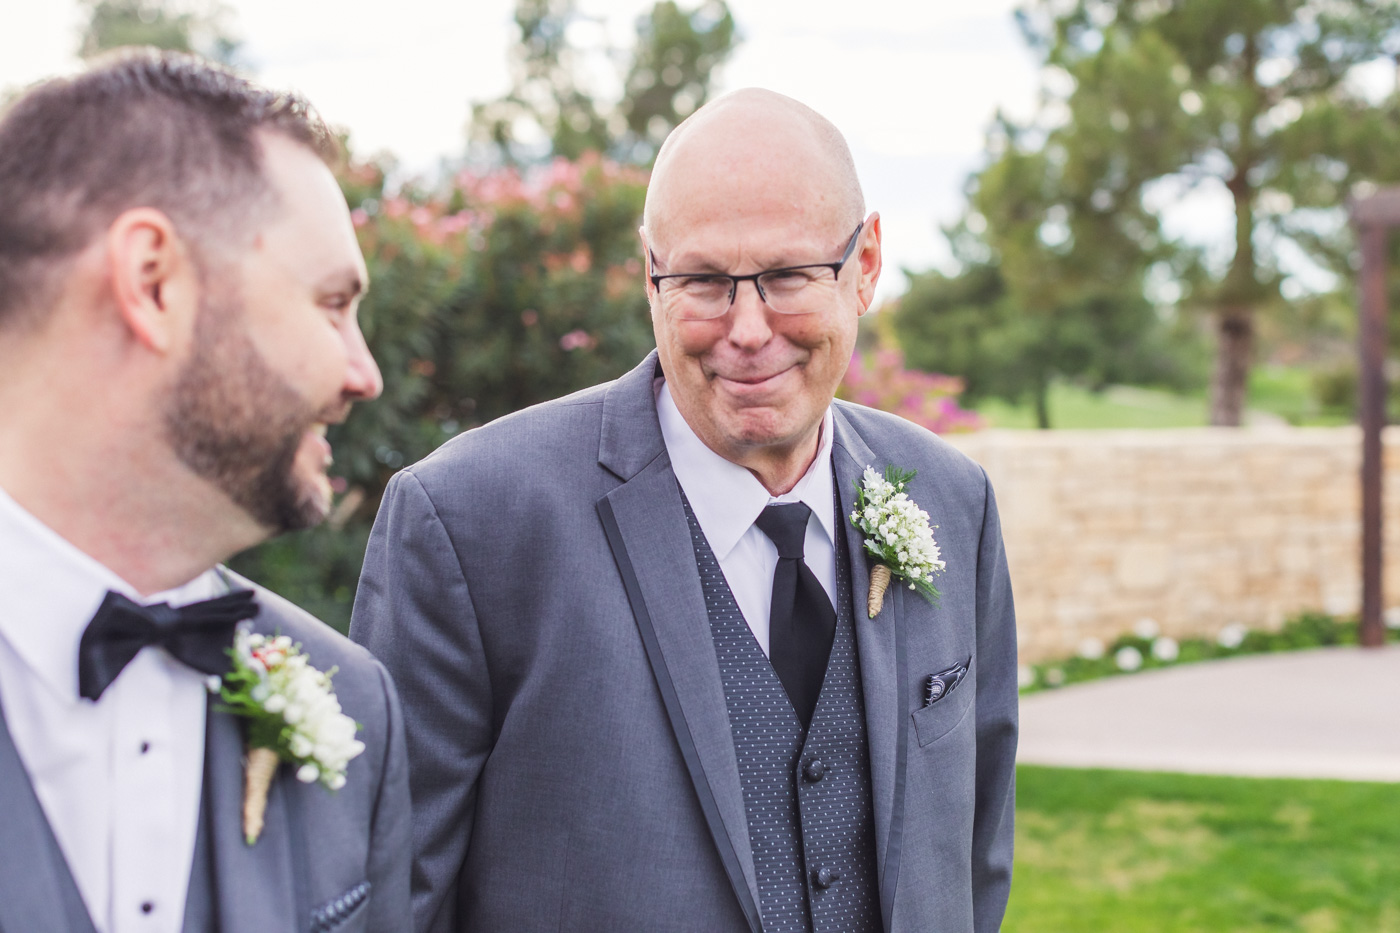 groom-and-father-at-wedding